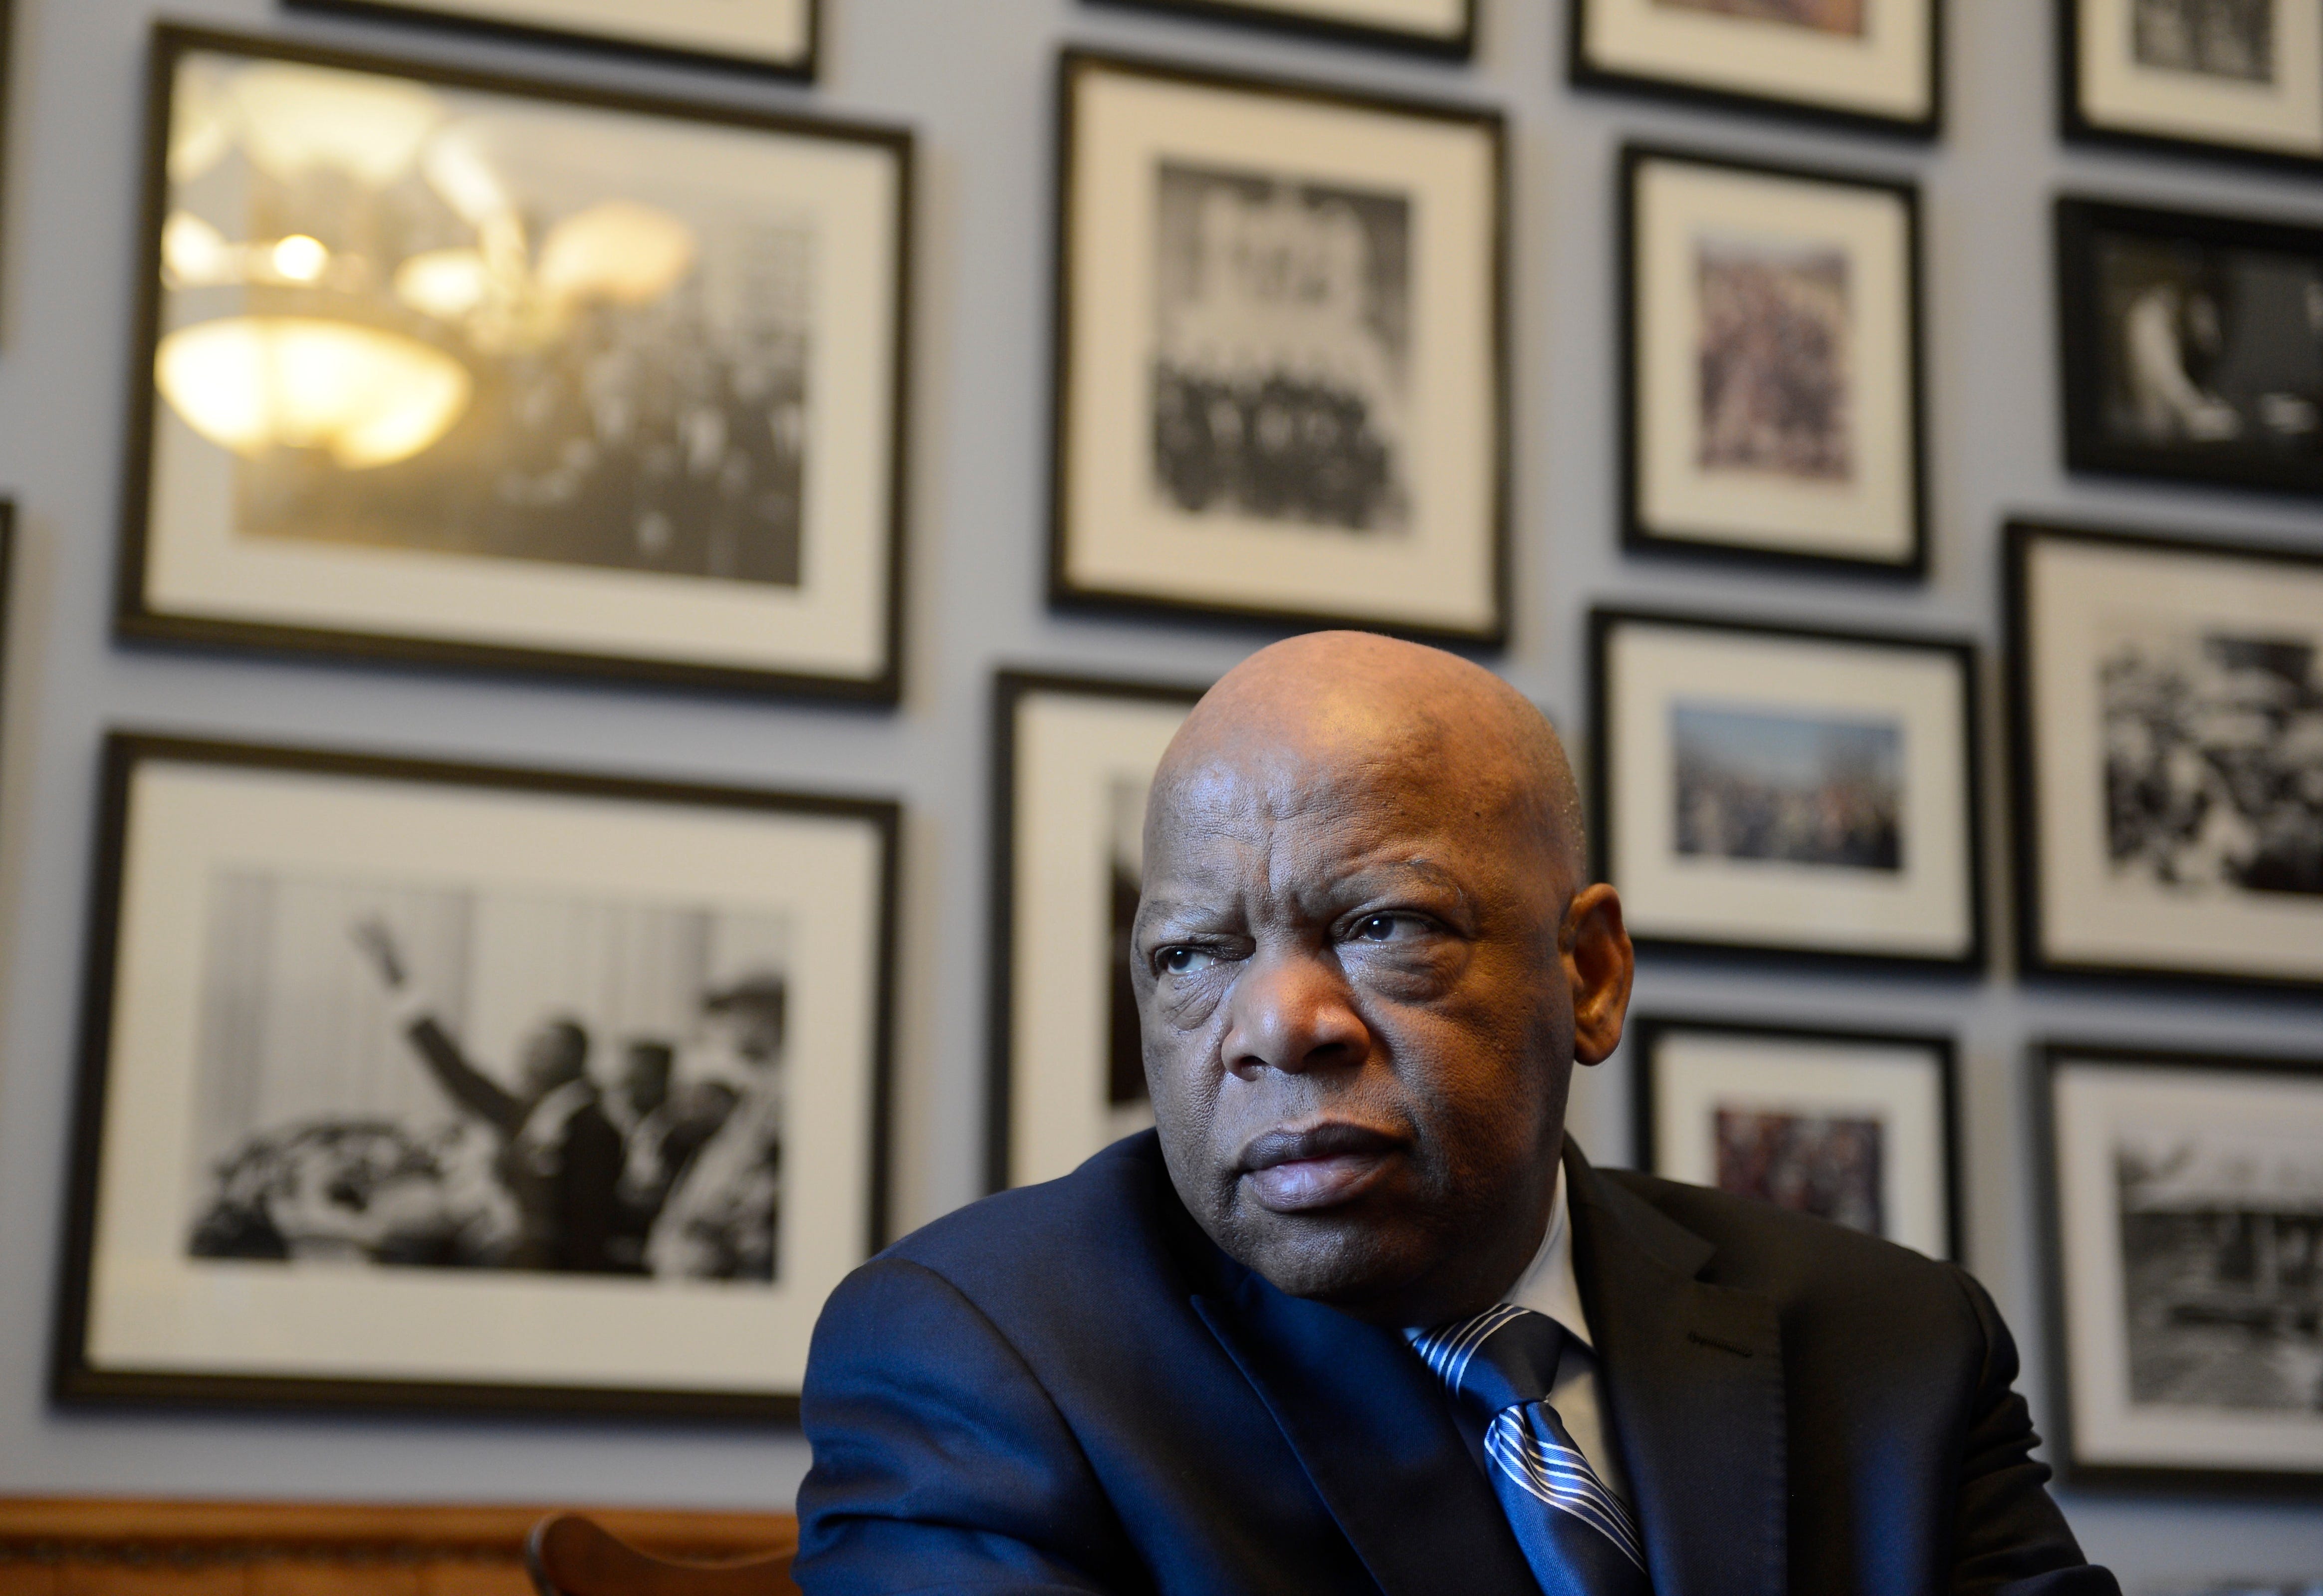 Rep. John Lewis, D-Ga., who carried the struggle against racial discrimination from Southern battlegrounds of the 1960s to the halls of Congress, died in July.